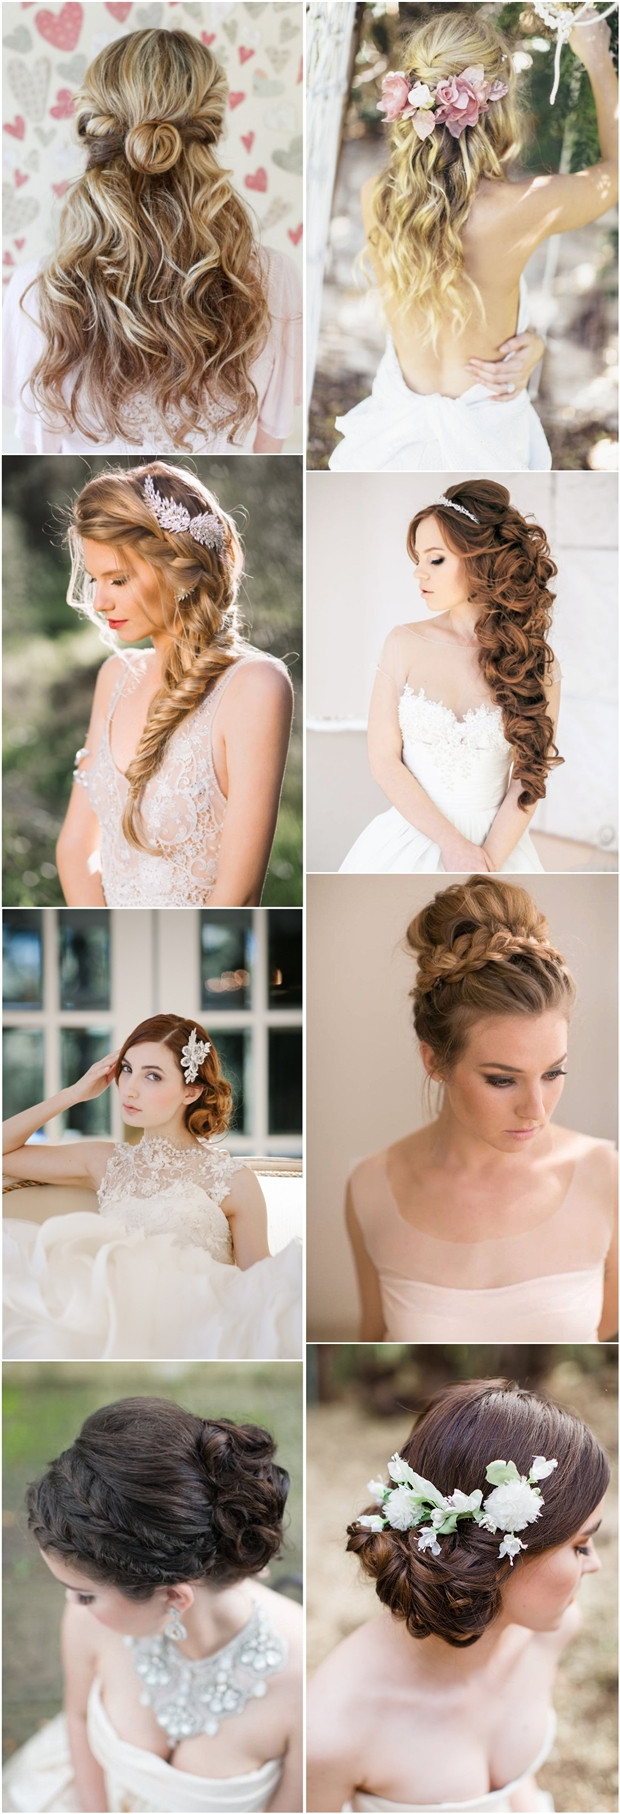 Half Up Half Down Braided Wedding Hairstyles
 20 Fabulous Wedding Hairstyles for Every Bride